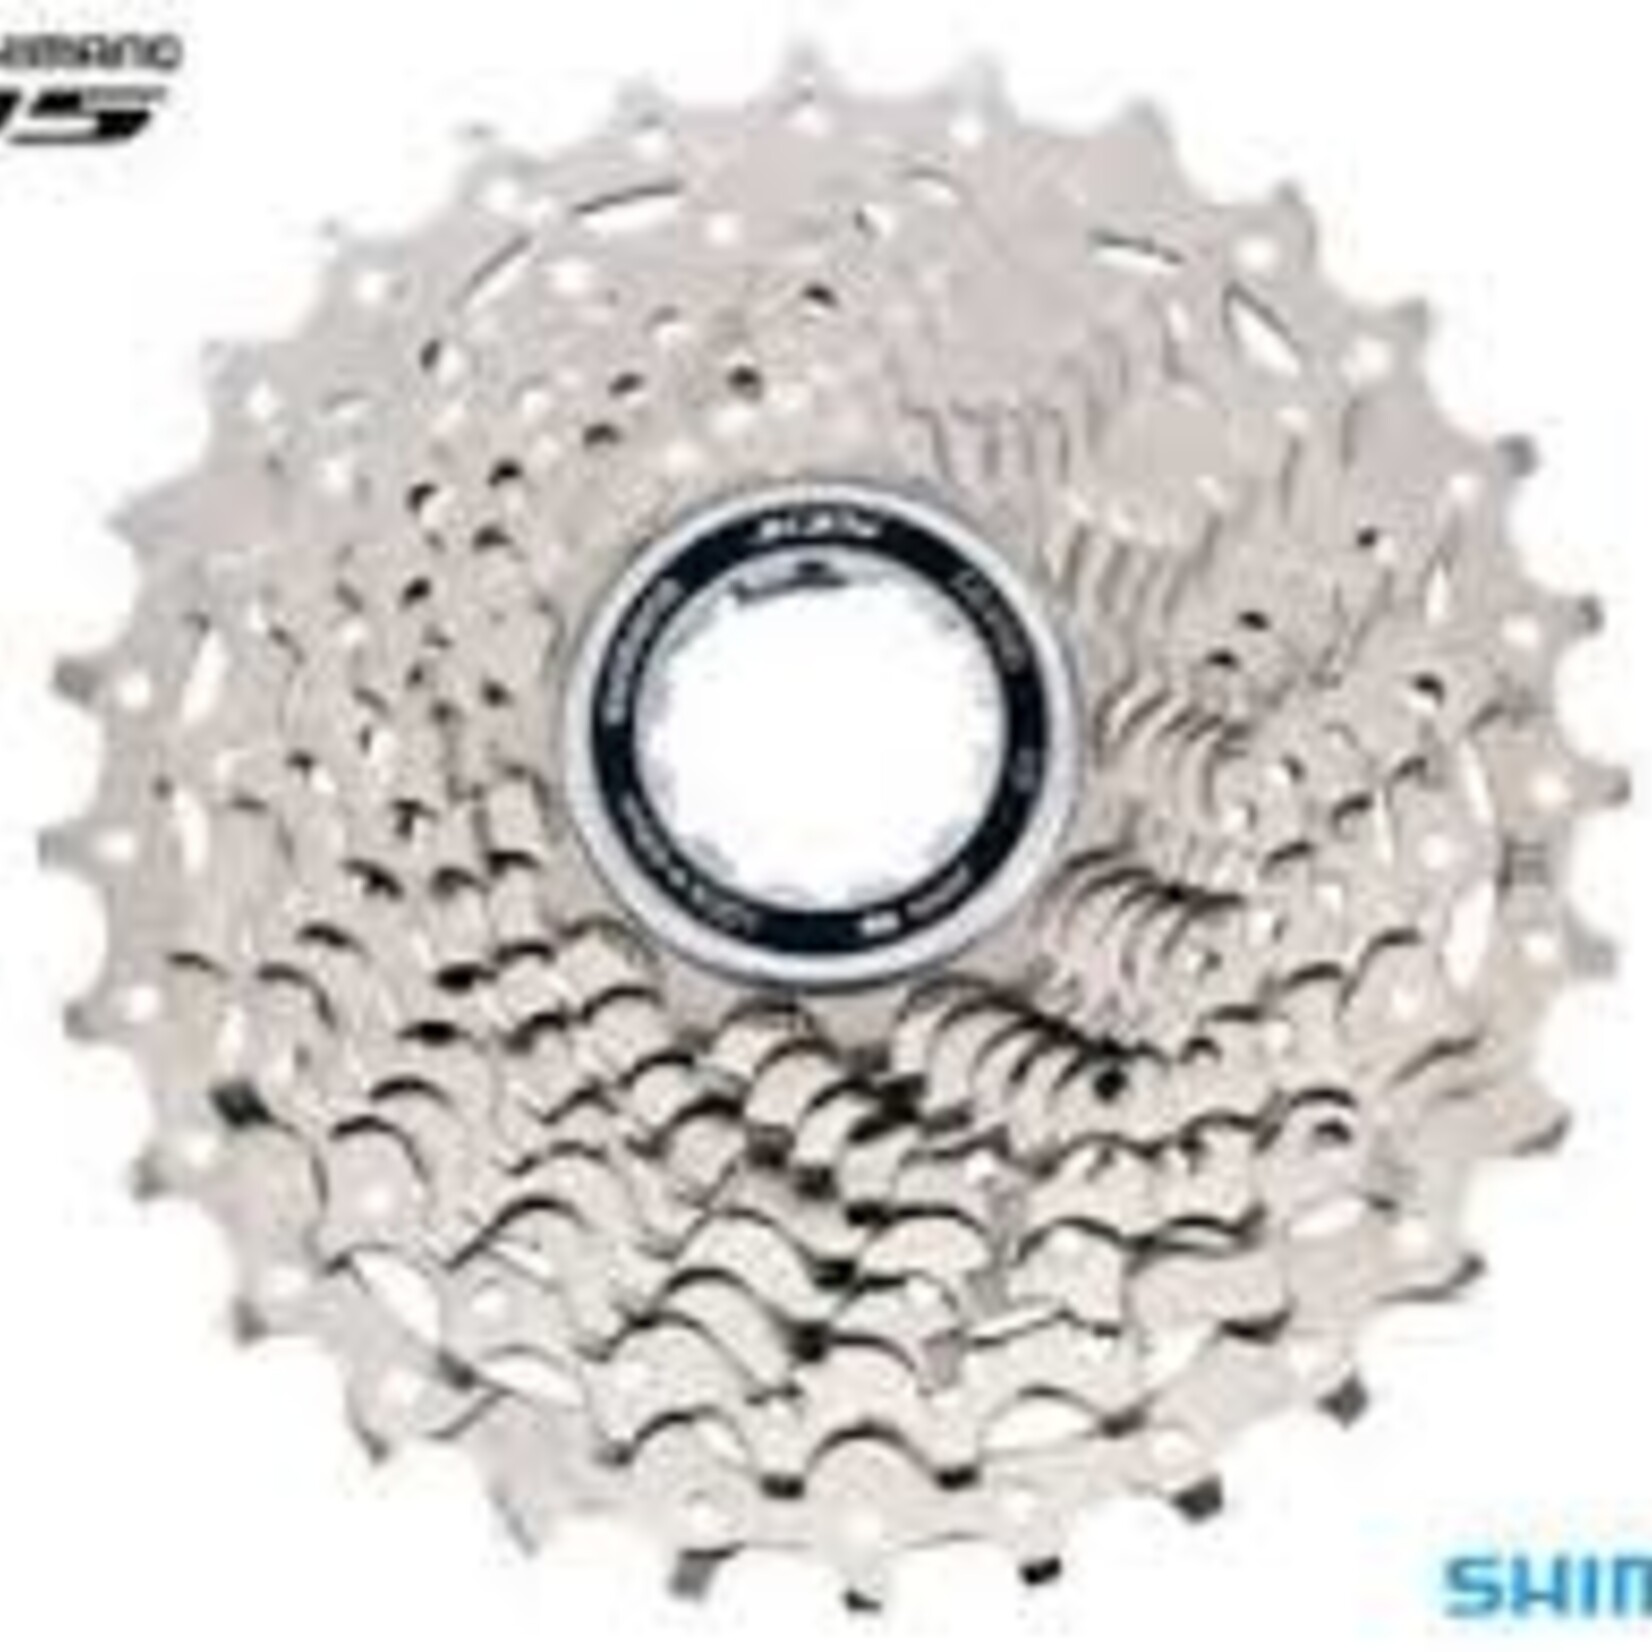 Shimano Shimano CS-5700, 105 10-SPEED 11-12-13-14-15-17-19-21-24-28T 1MM SPACER INCLUDED, IND.PACK